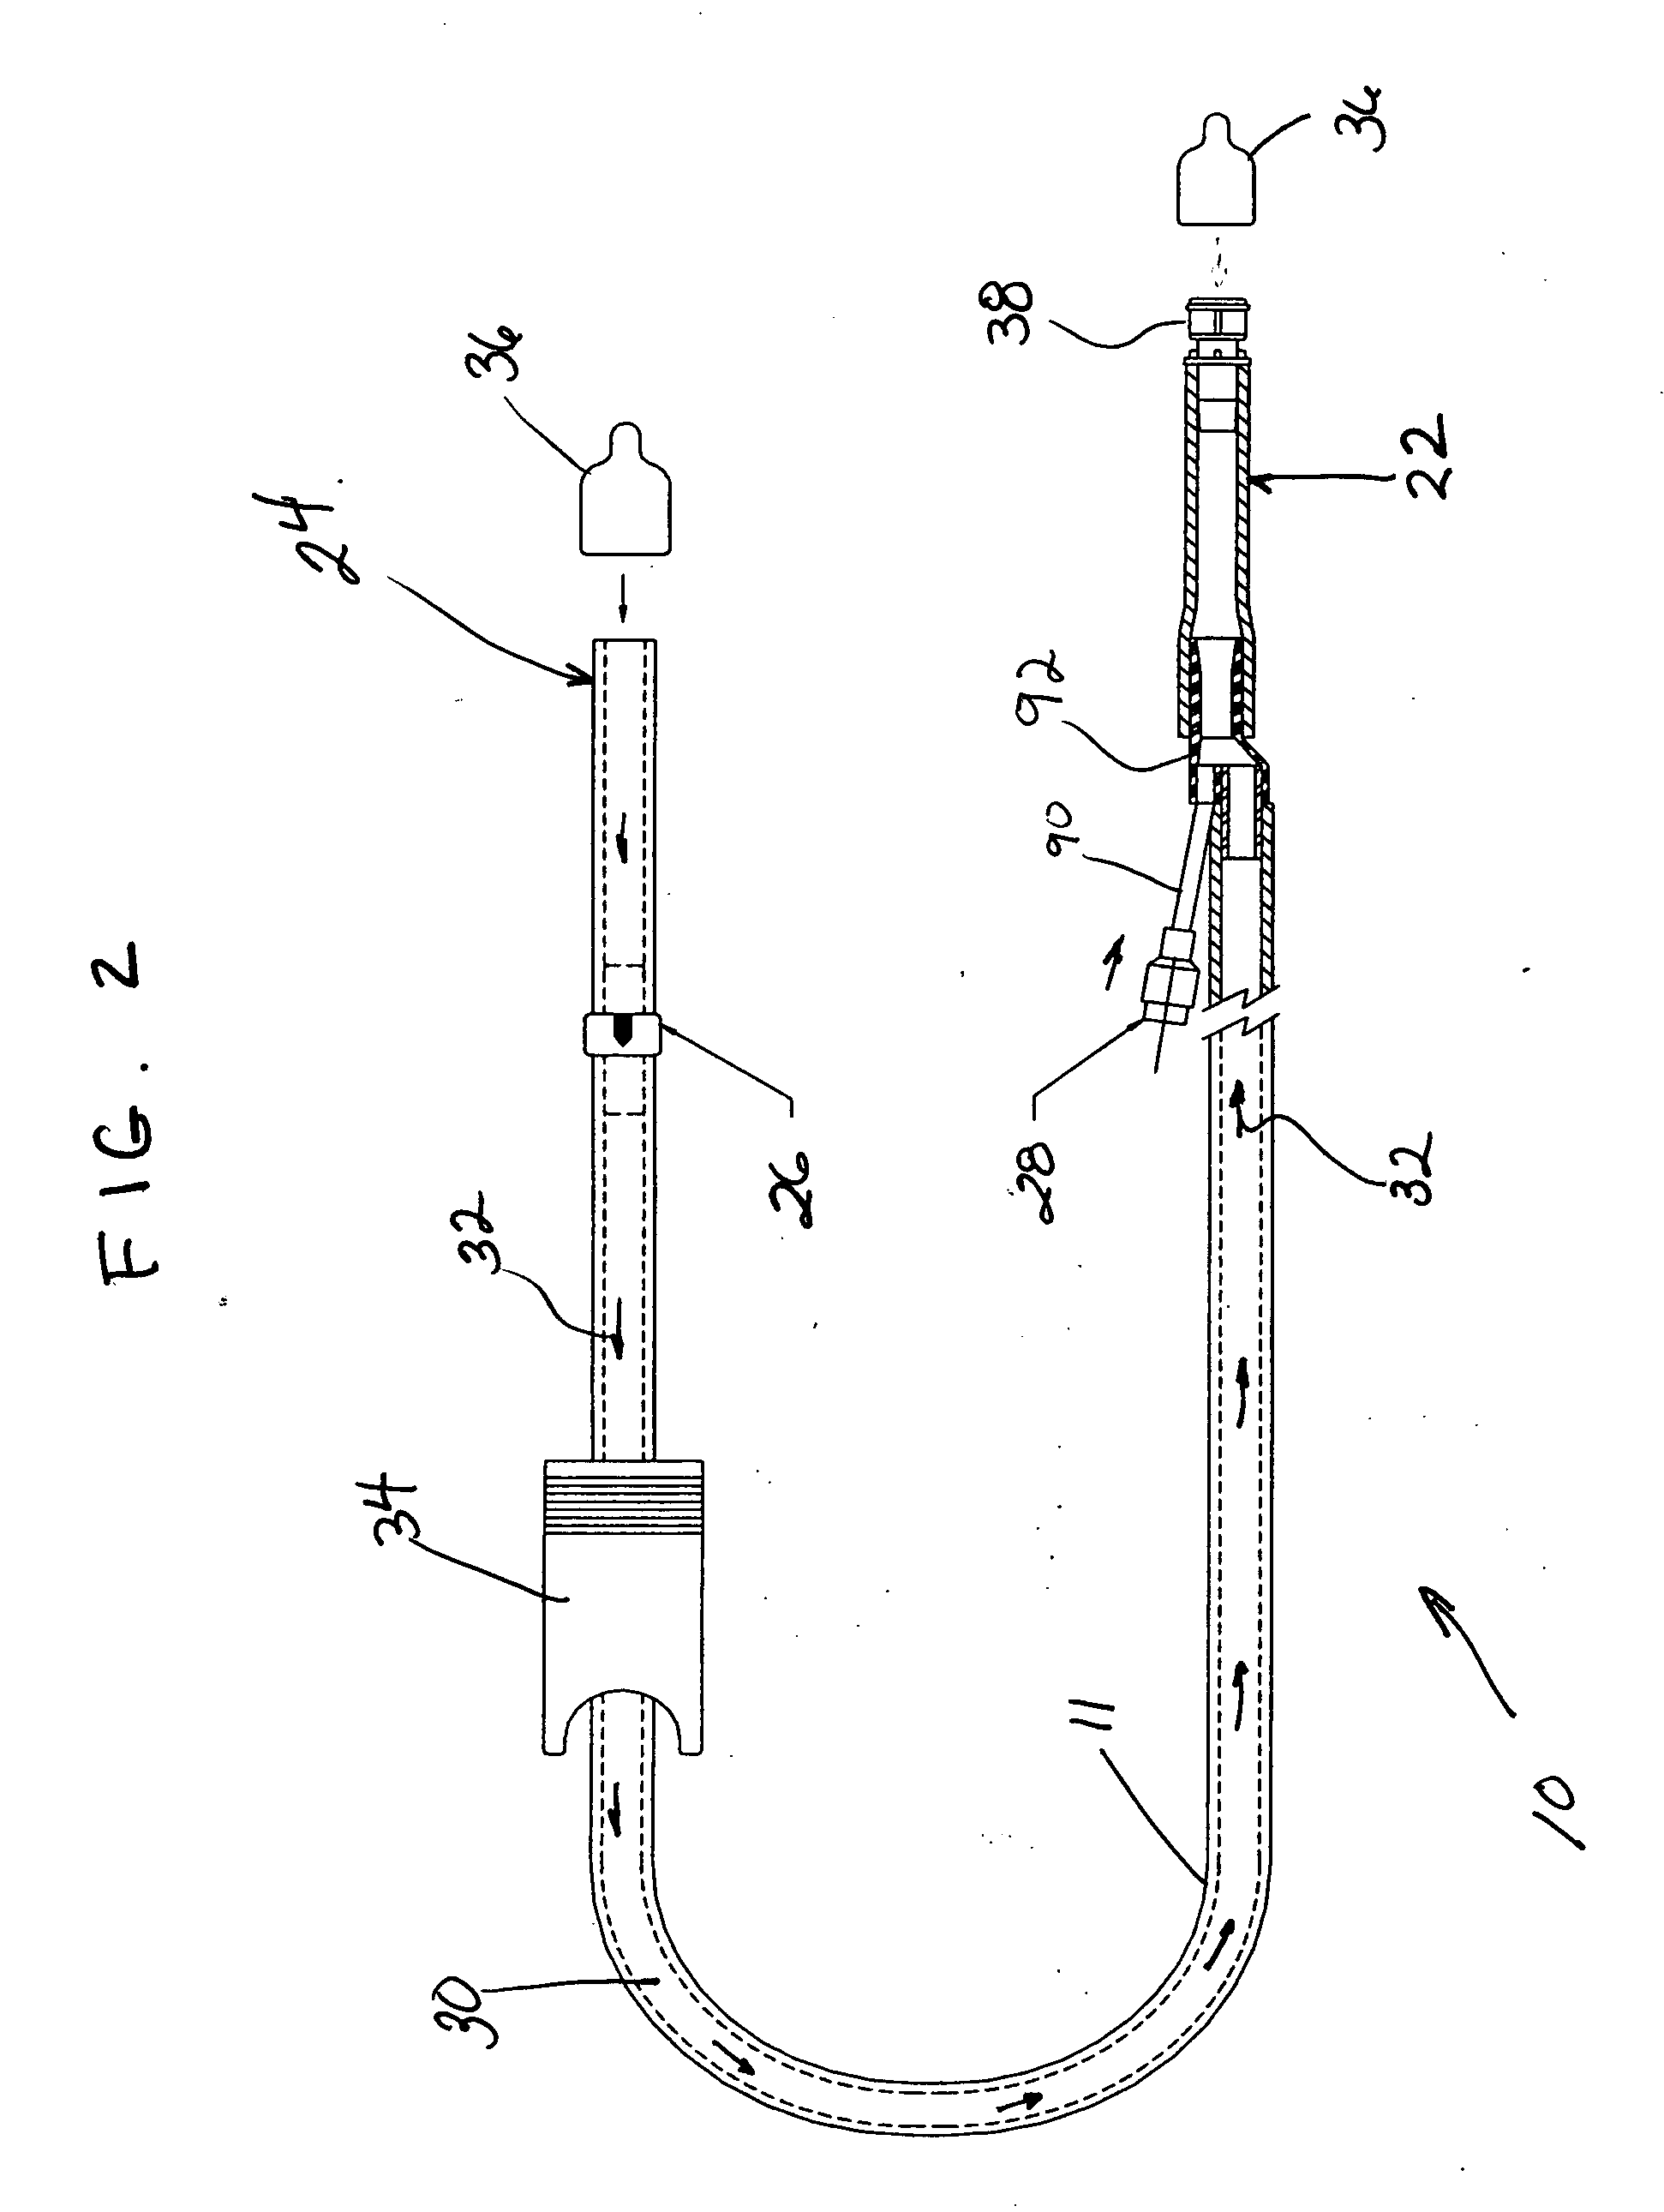 Surgical wound drain tube with flow control safeguards